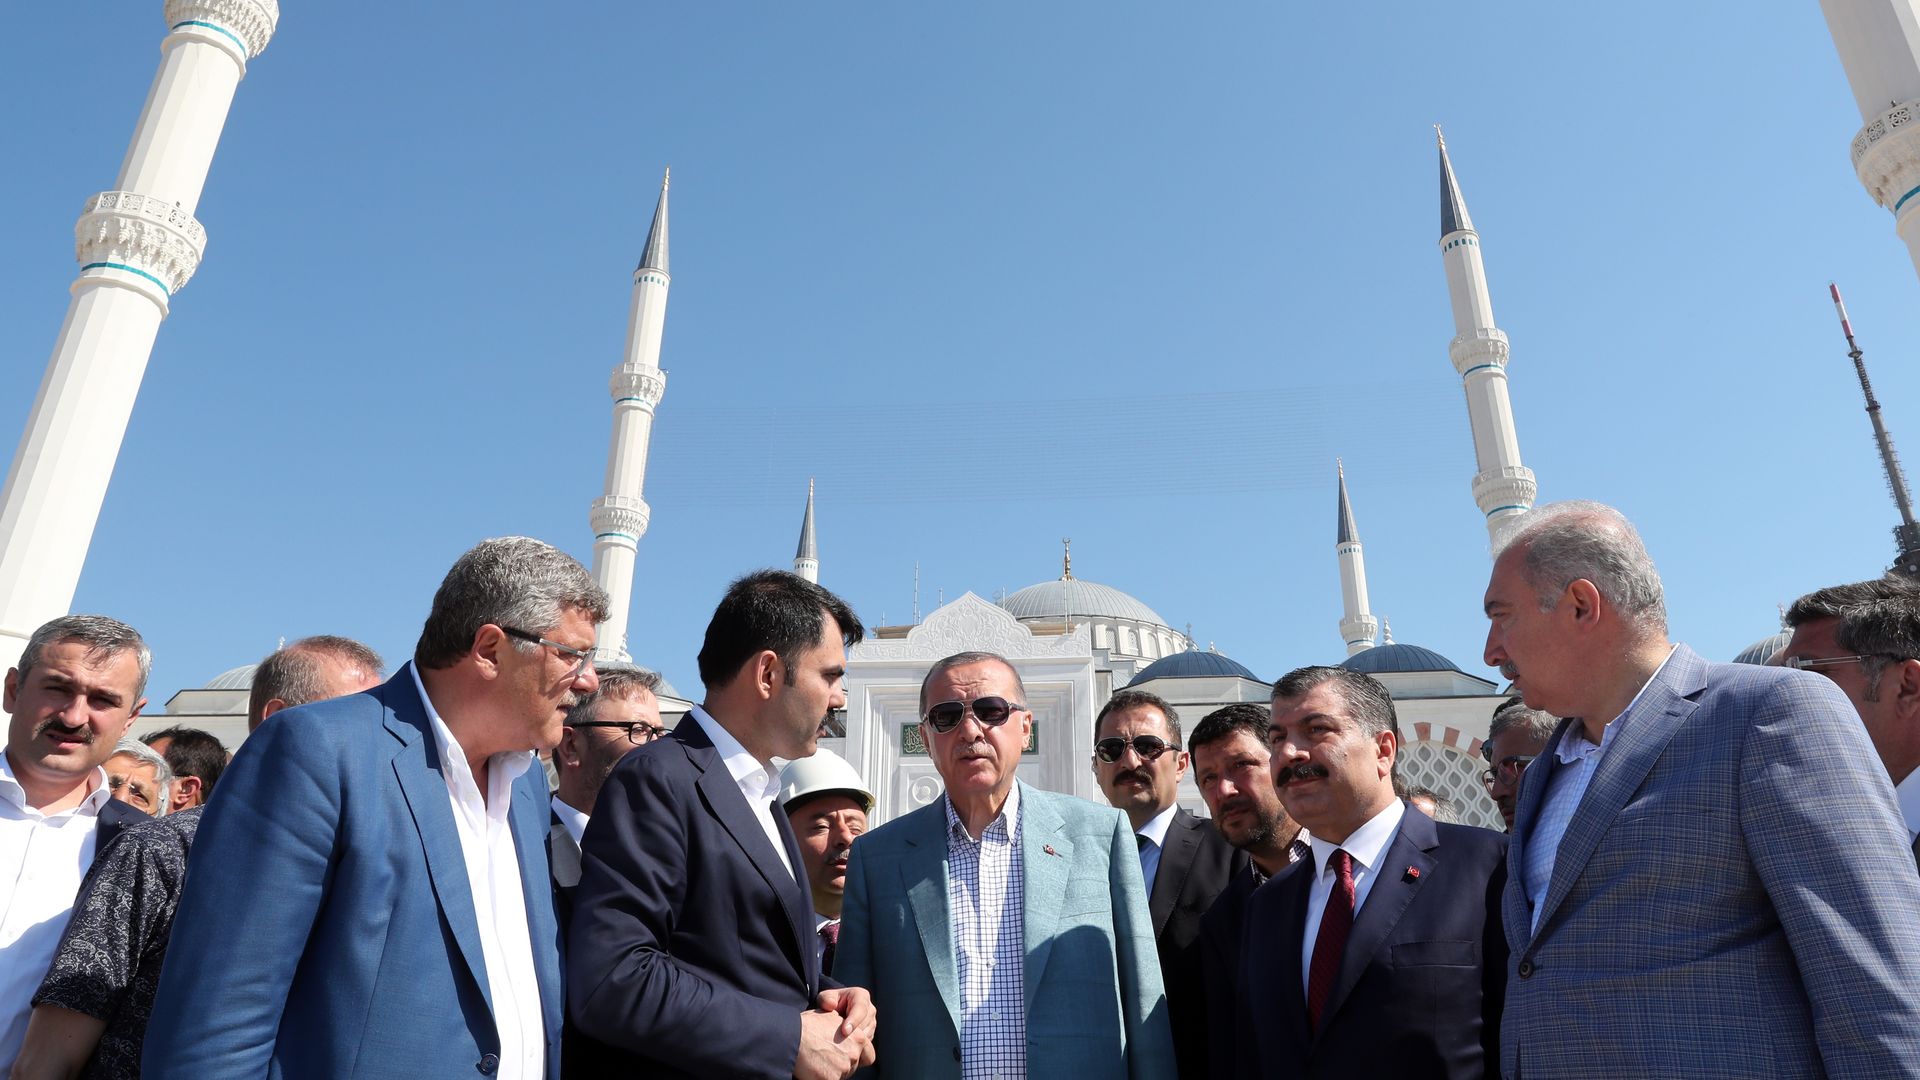 Turkish President Erdogan receives information about the current construction process of the Camlica Mosque from an engineer in Istanbul, Turkey on August 05, 2018. 